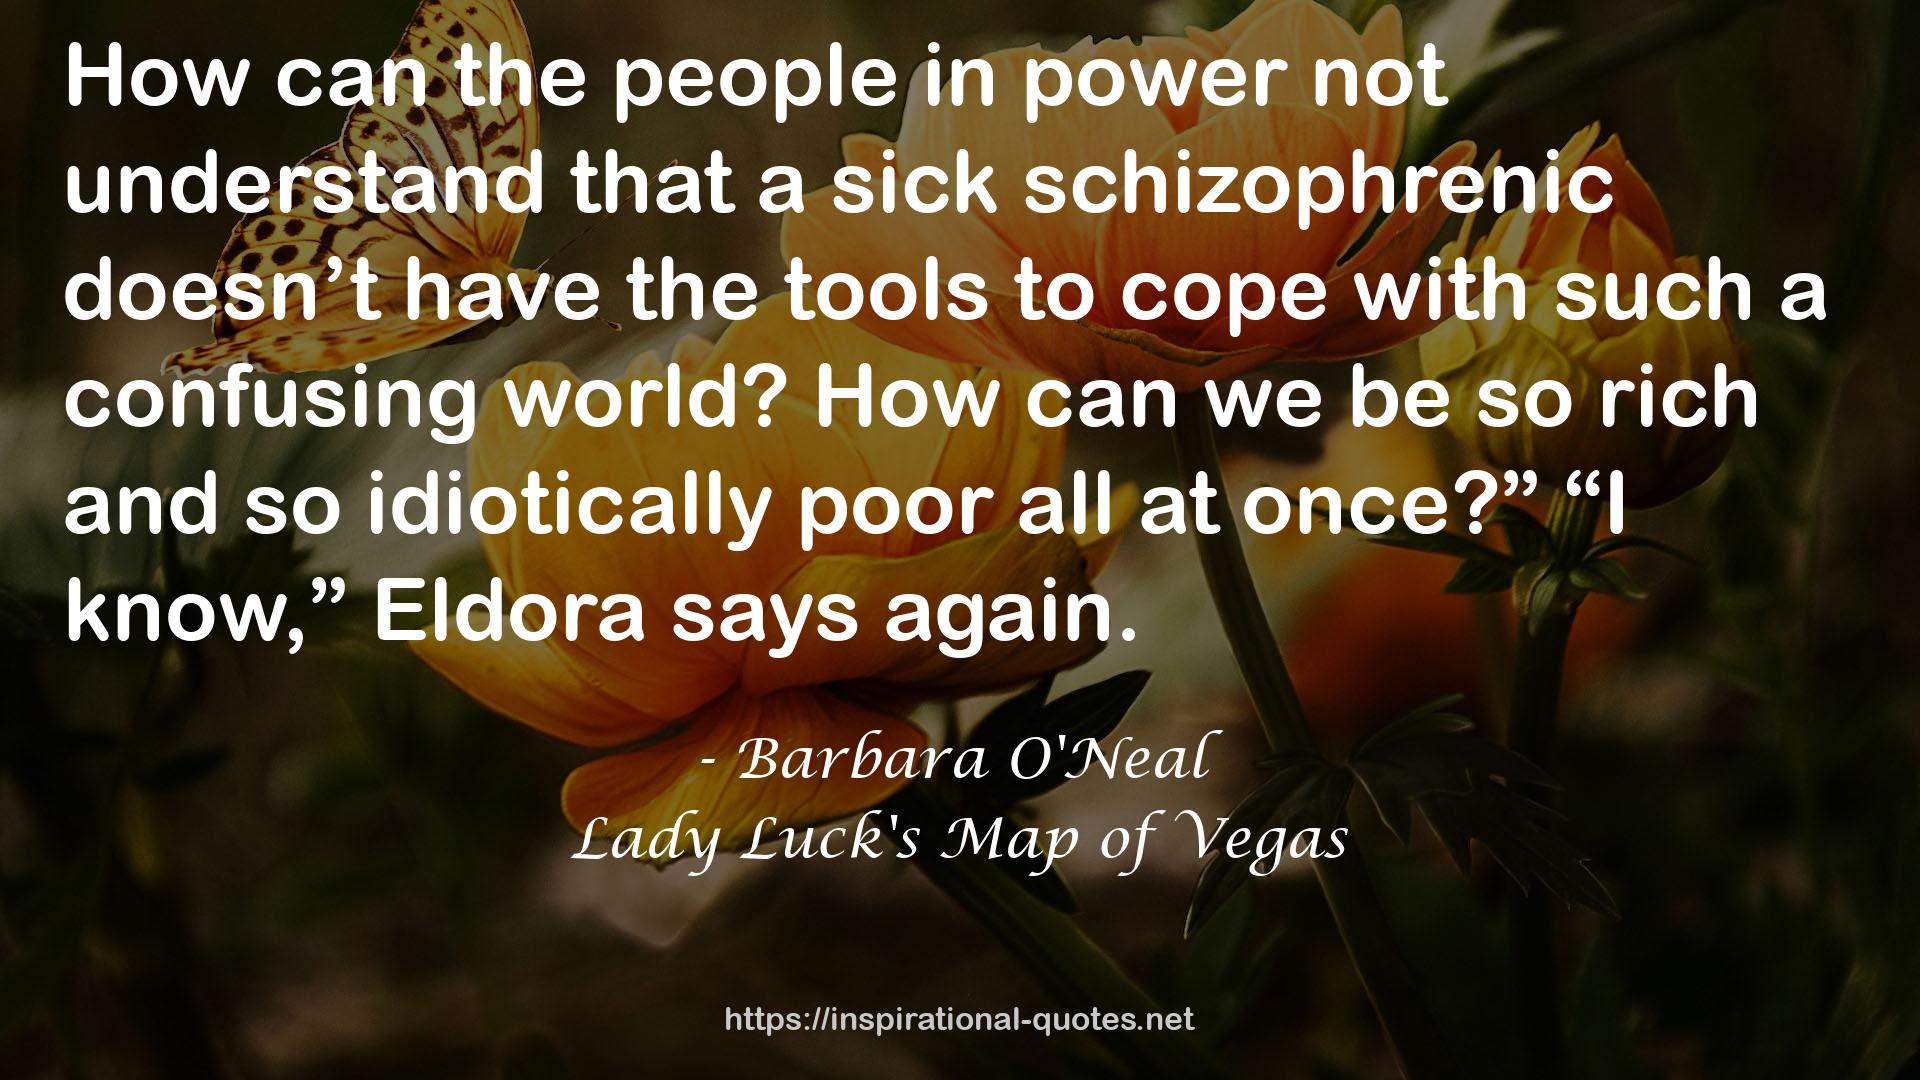 Lady Luck's Map of Vegas QUOTES